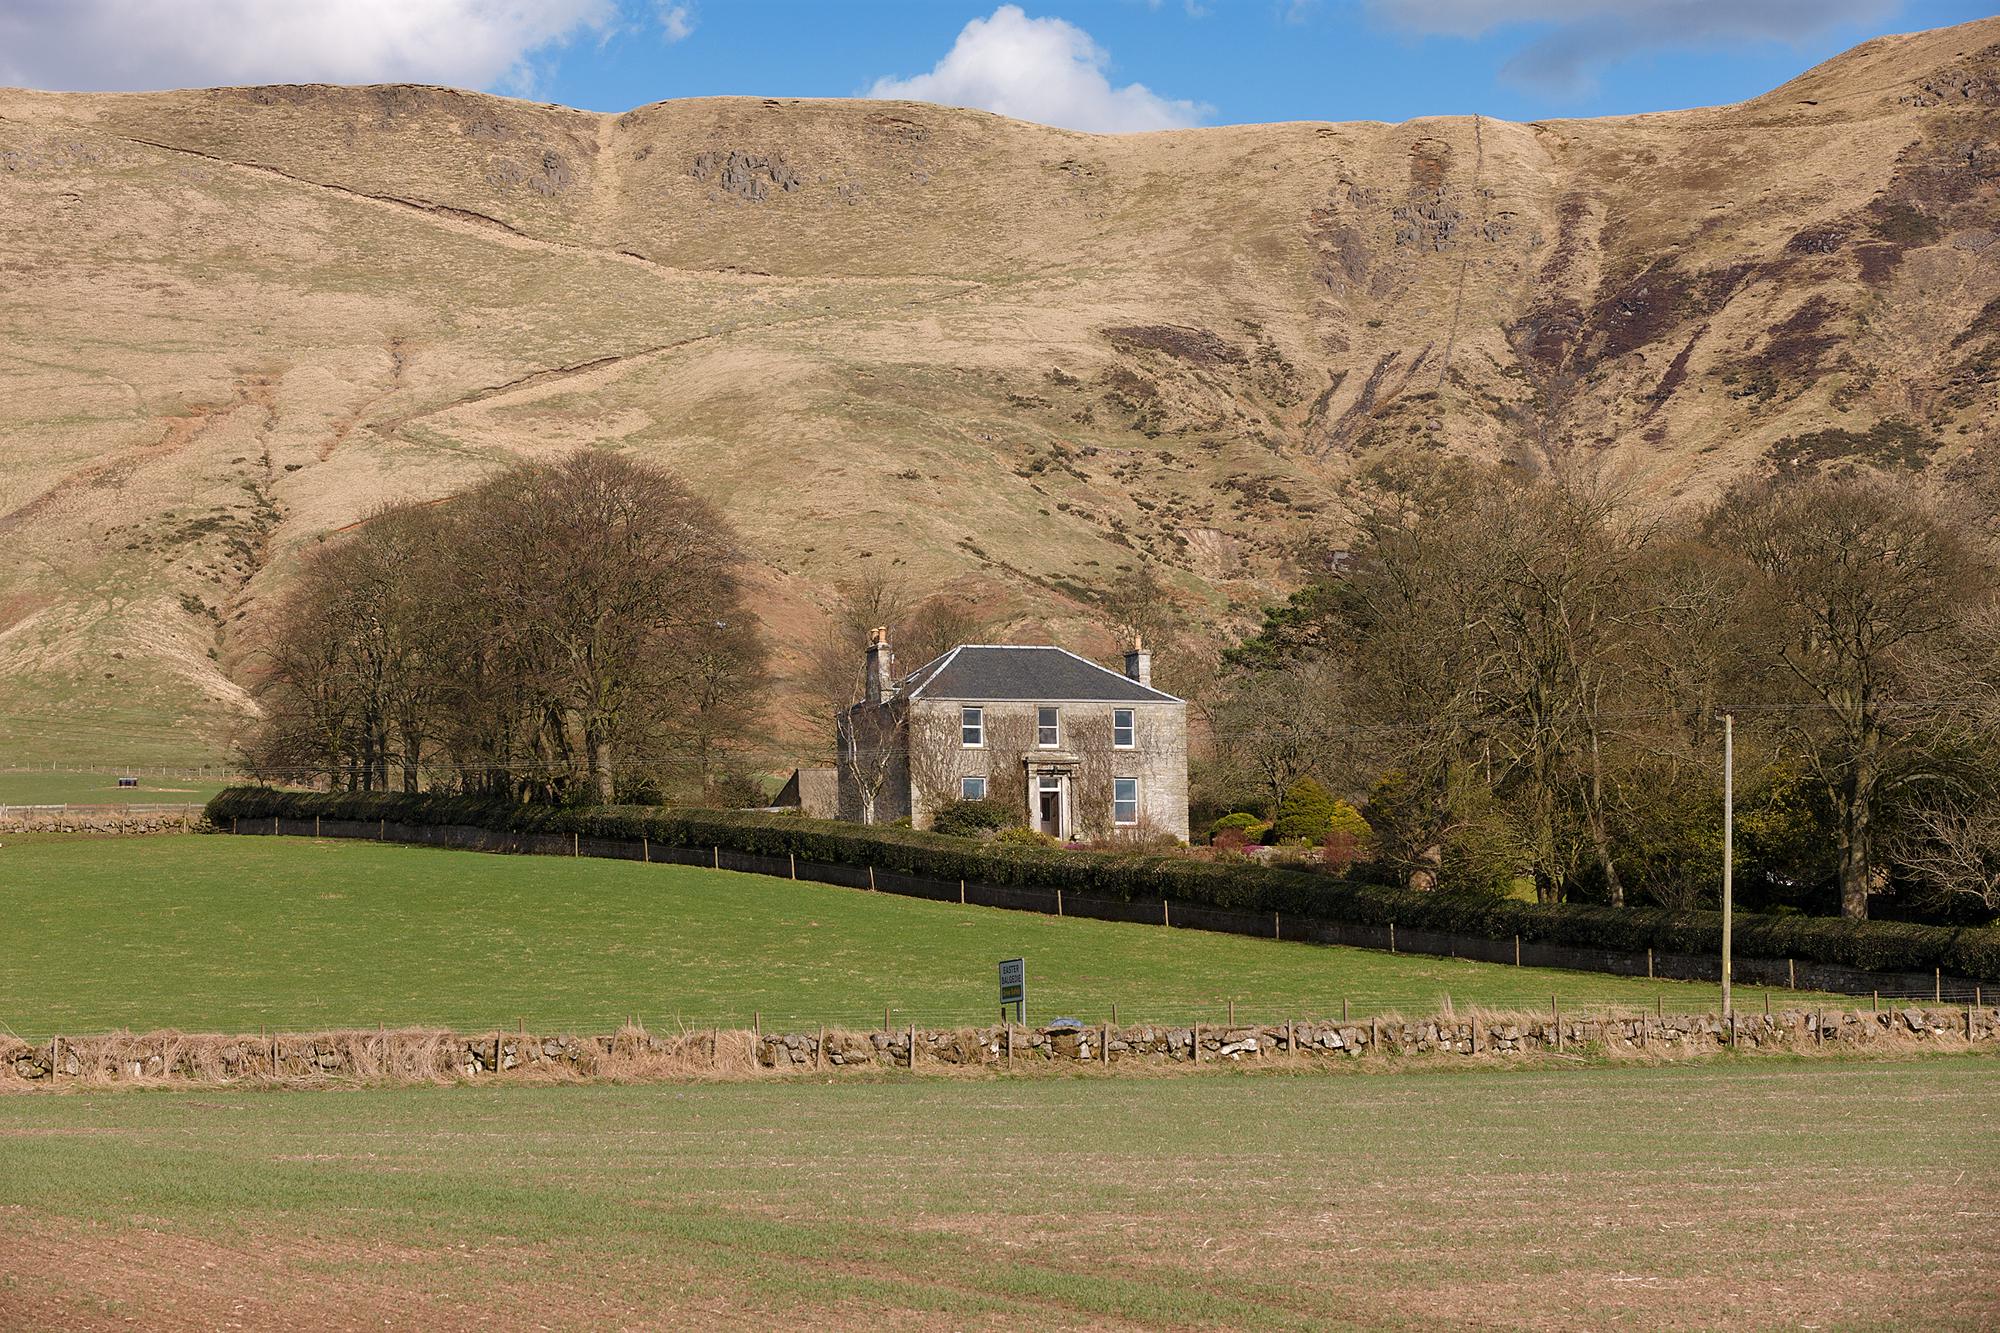 Hotels, Cottages, B&Bs & Glamping in Perthshire